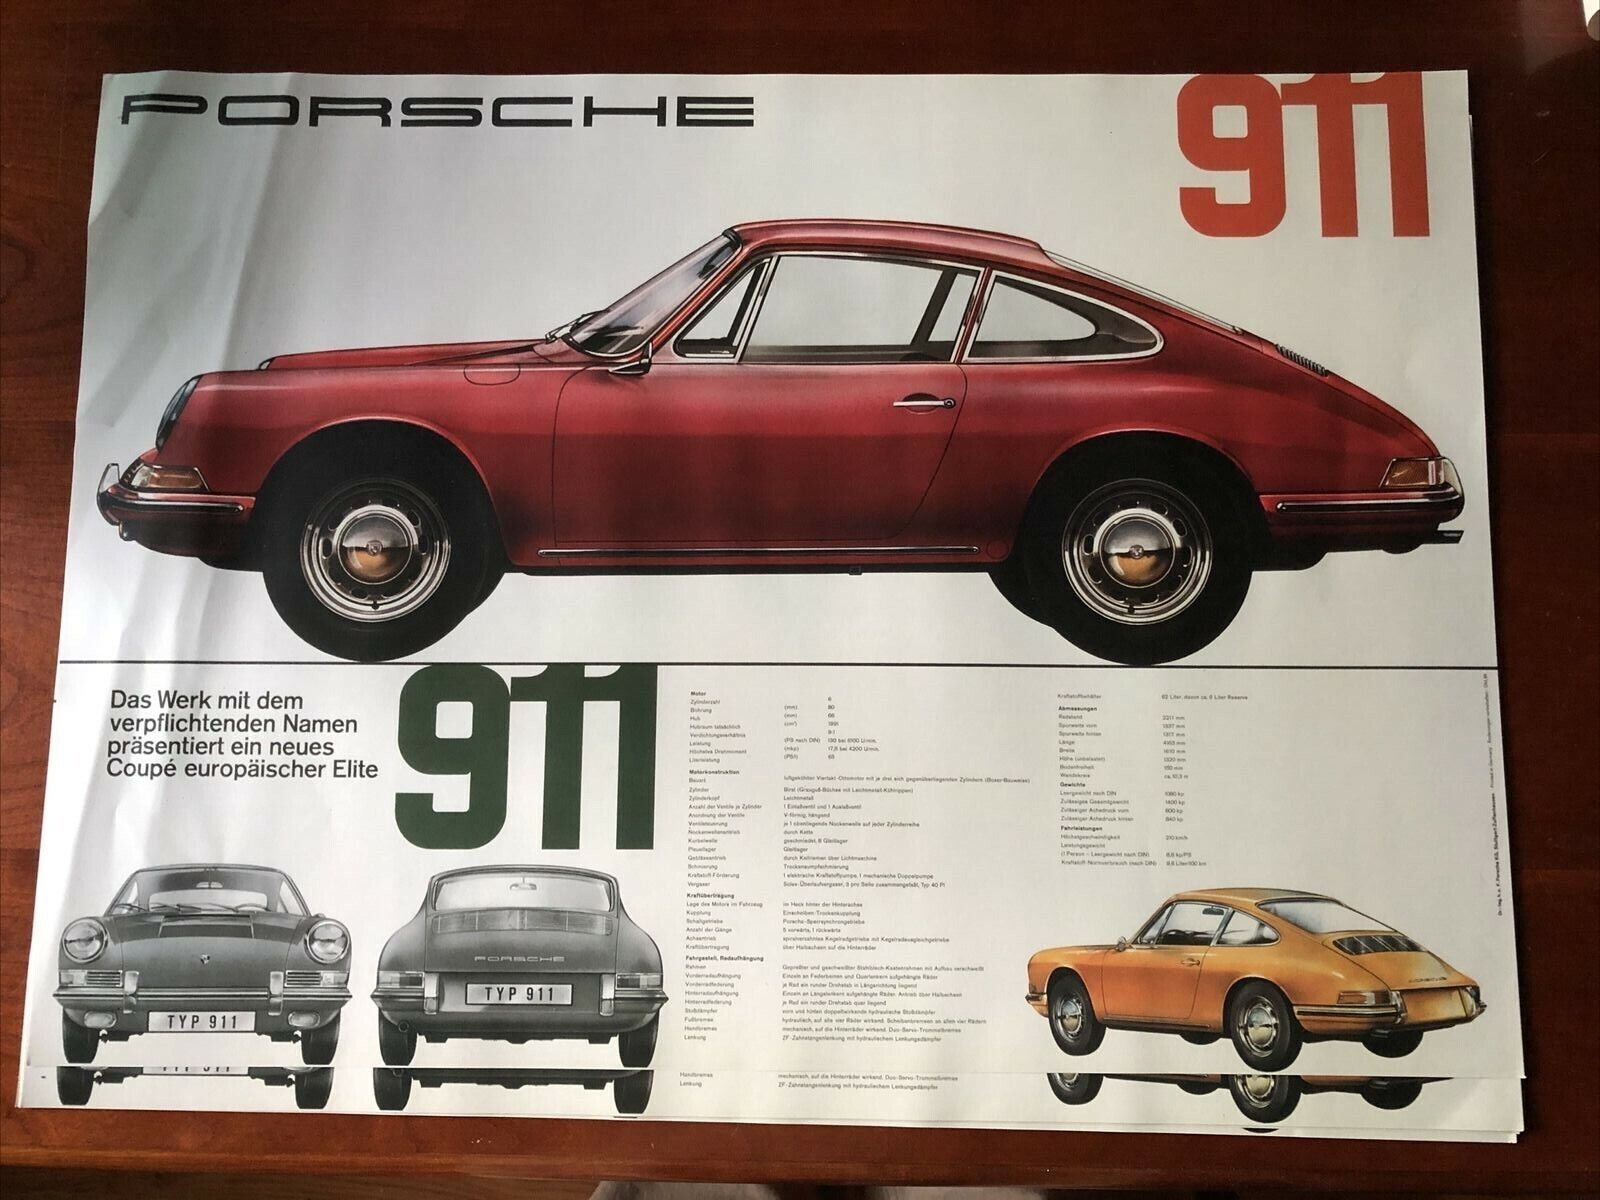 Awesome Early Porsche 911 Specs in Poster In German